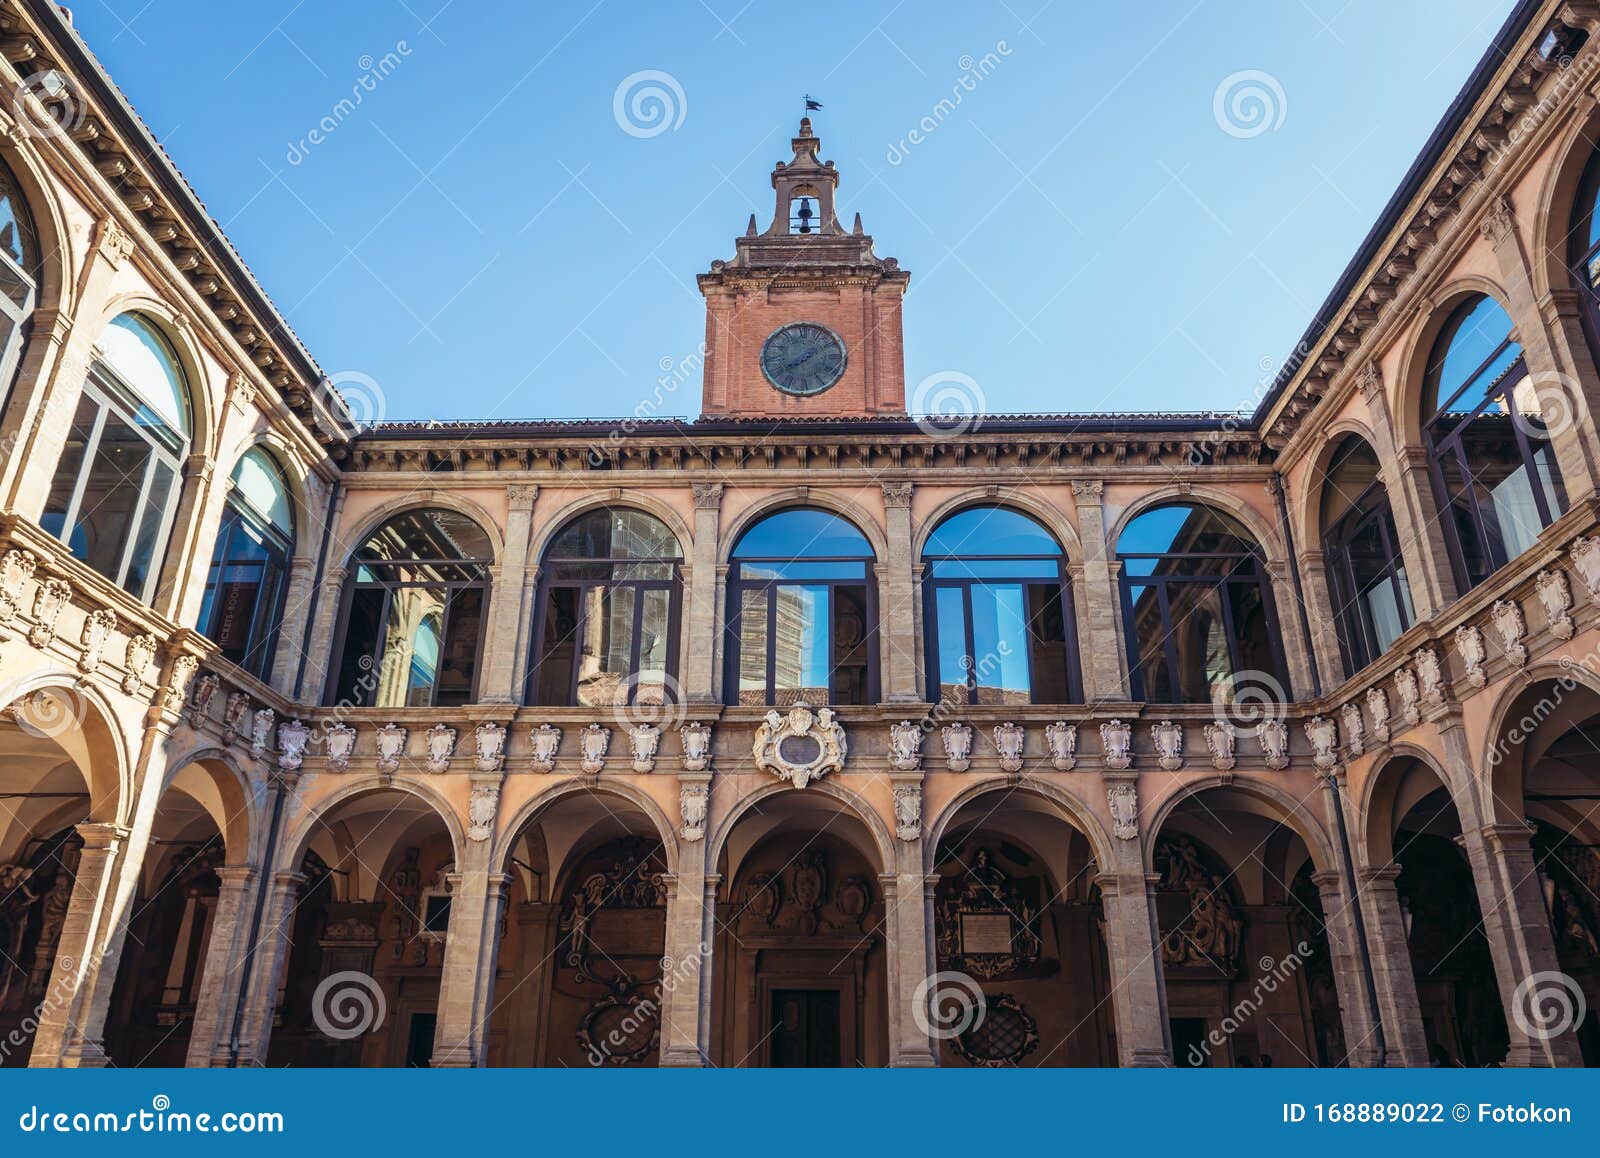 international tourism and leisure industries university of bologna